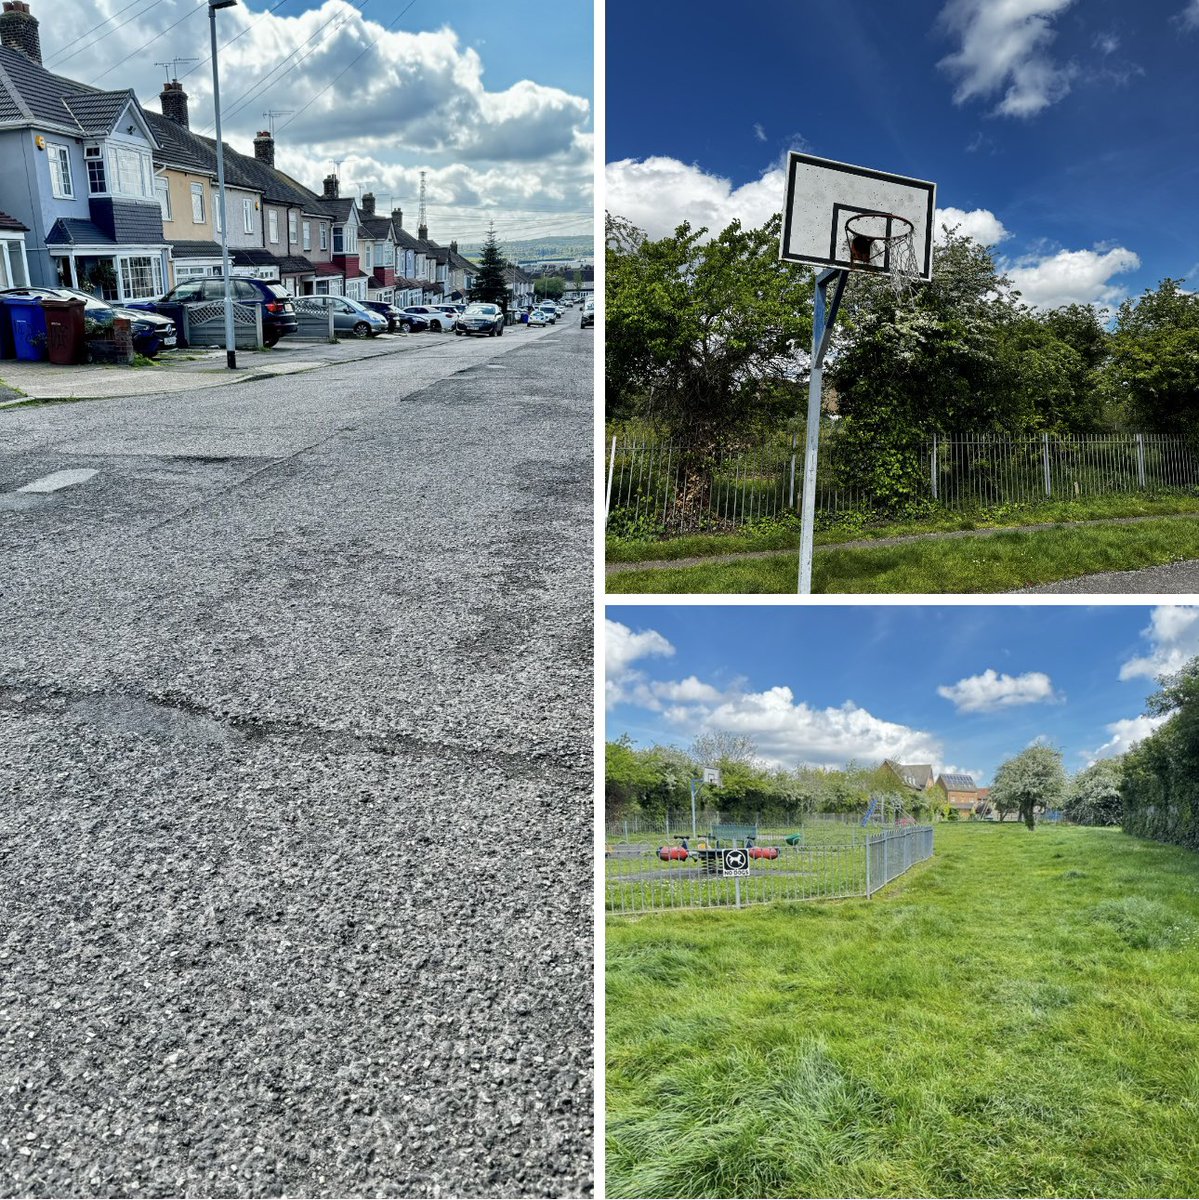 #Reported: I’ve asked the council to resurface a section of Parlmerston Road. I’ve also asked for Basketball net replacement & regular maintenance of Palmerston Gardens Park in #SouthStifford.